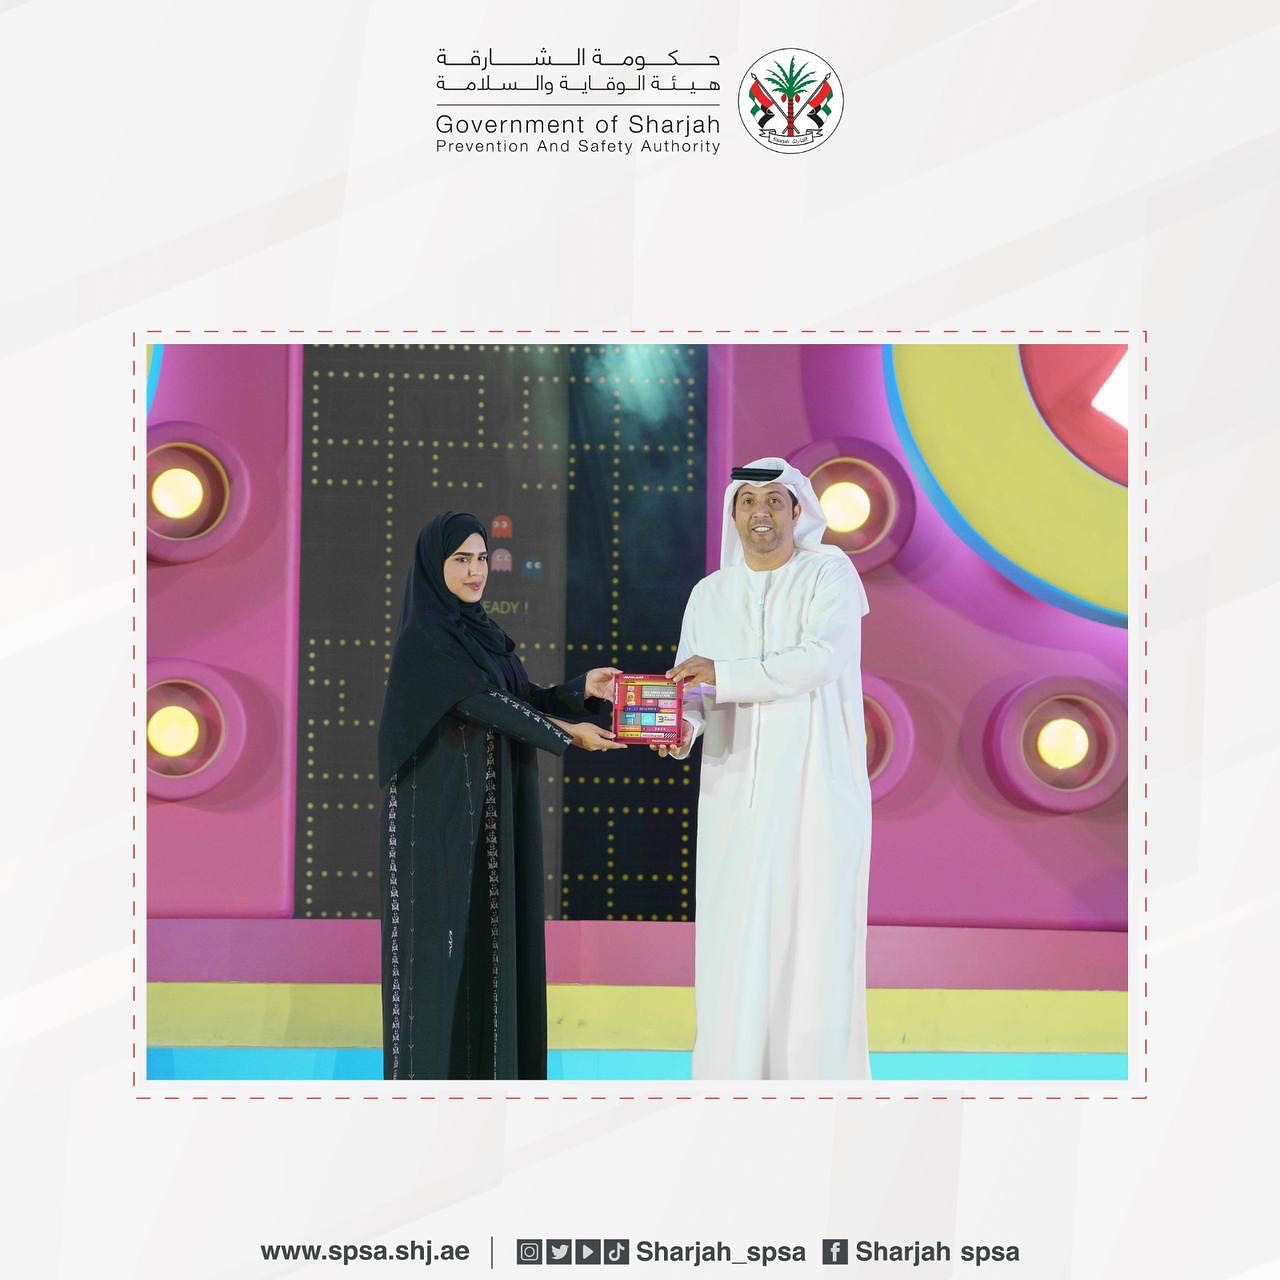 The Authority’s participation in the Sharjah Events Festival shines with its activities